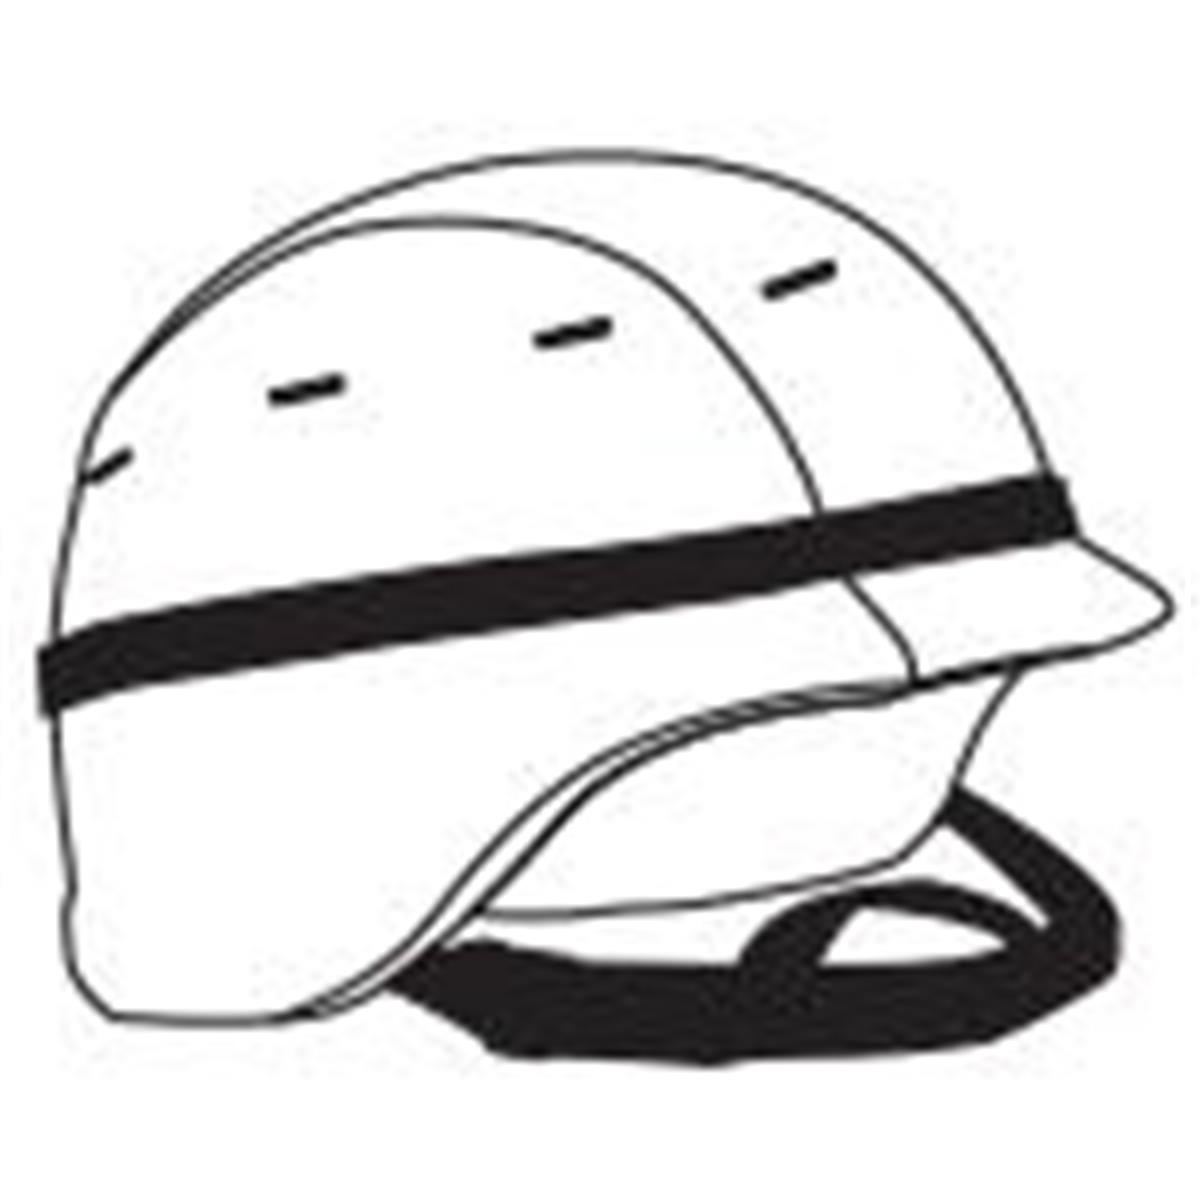 Picture of Creative Shapes Etc SE-0398 0.5 x 0.5 in. Incentive Stamp - Helmet